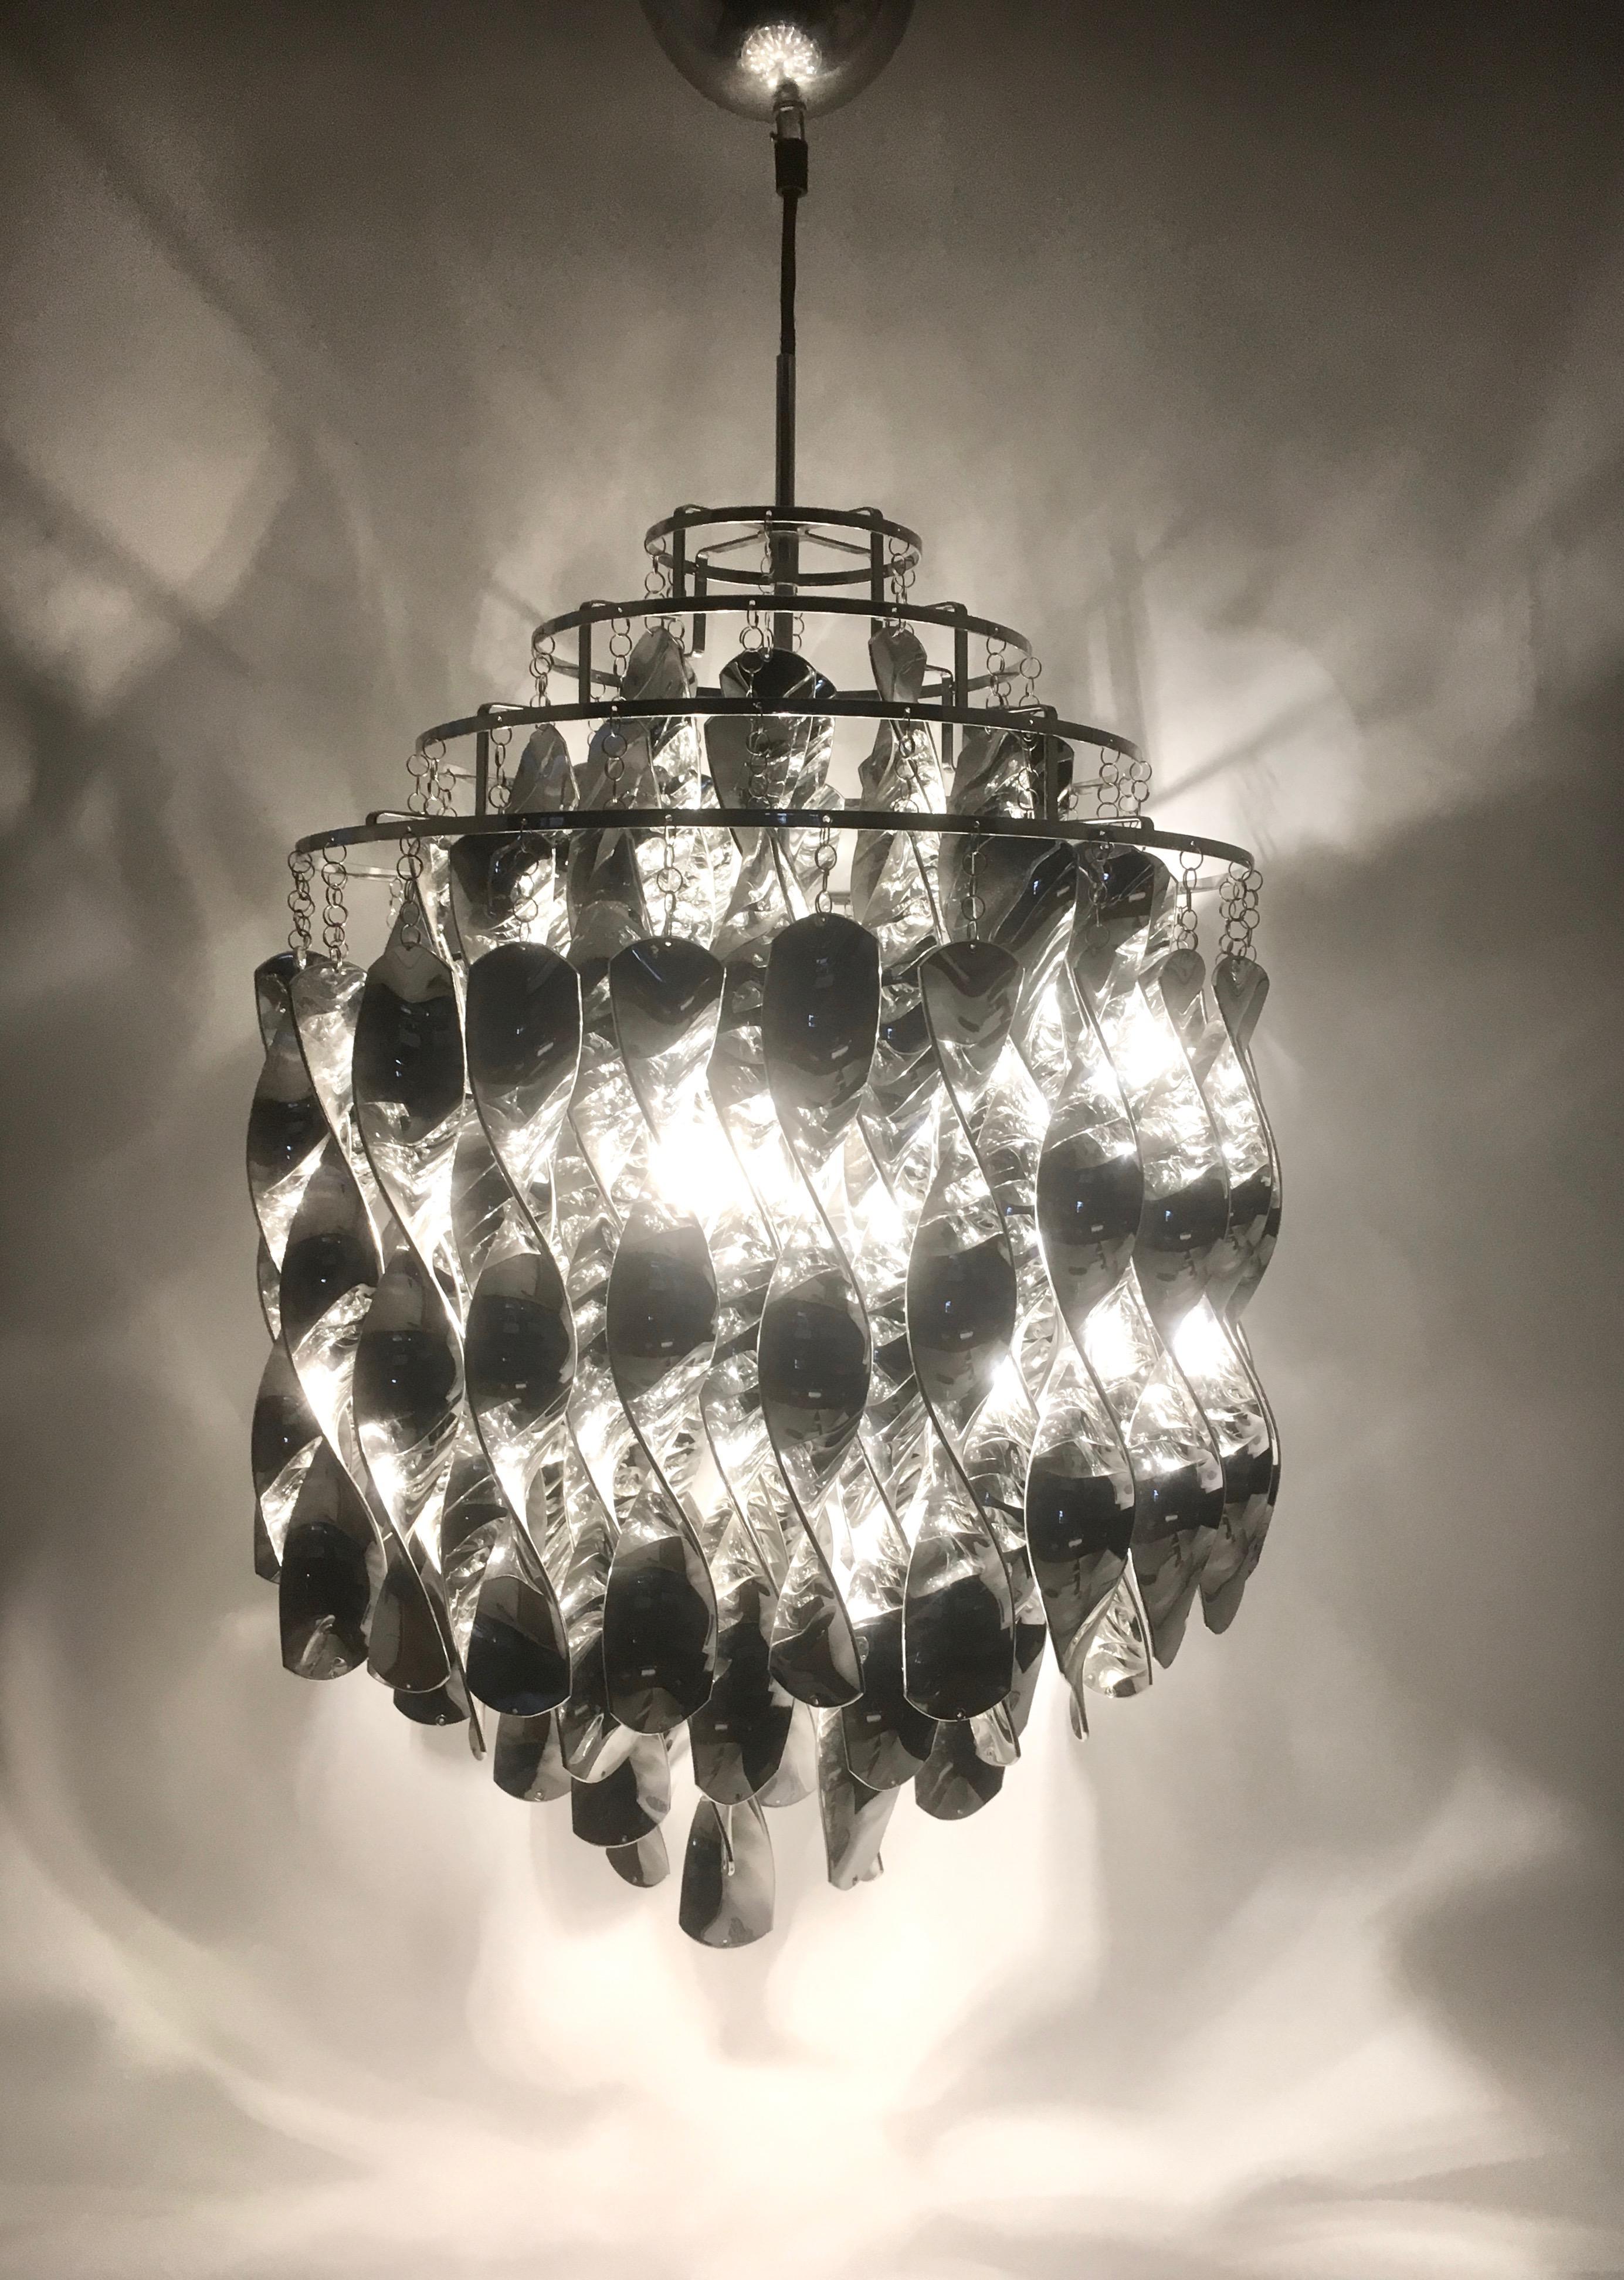 The pendant is adorned with spirals that hang in orderly calm. This not only creates a pleasantly diffuse light,
but also fills the room with a sense of restrained energy distinctive to the artwork that is the Spiral SP01 in silver.

Concept
The